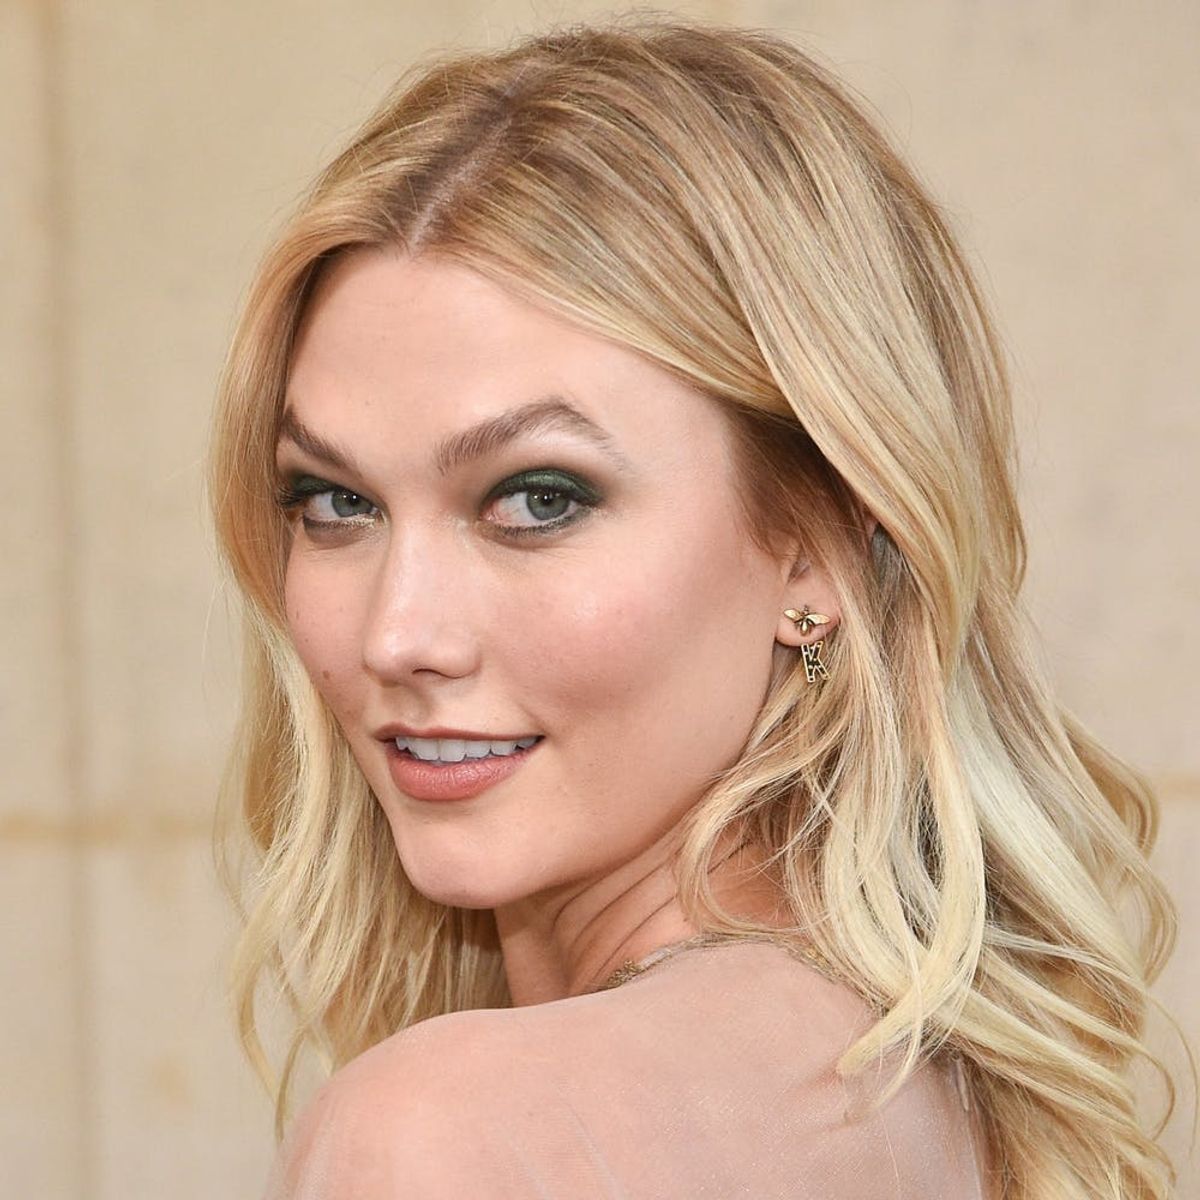 Karlie Kloss Chops 7 Inches to Debut Her New Spring Hairstyle